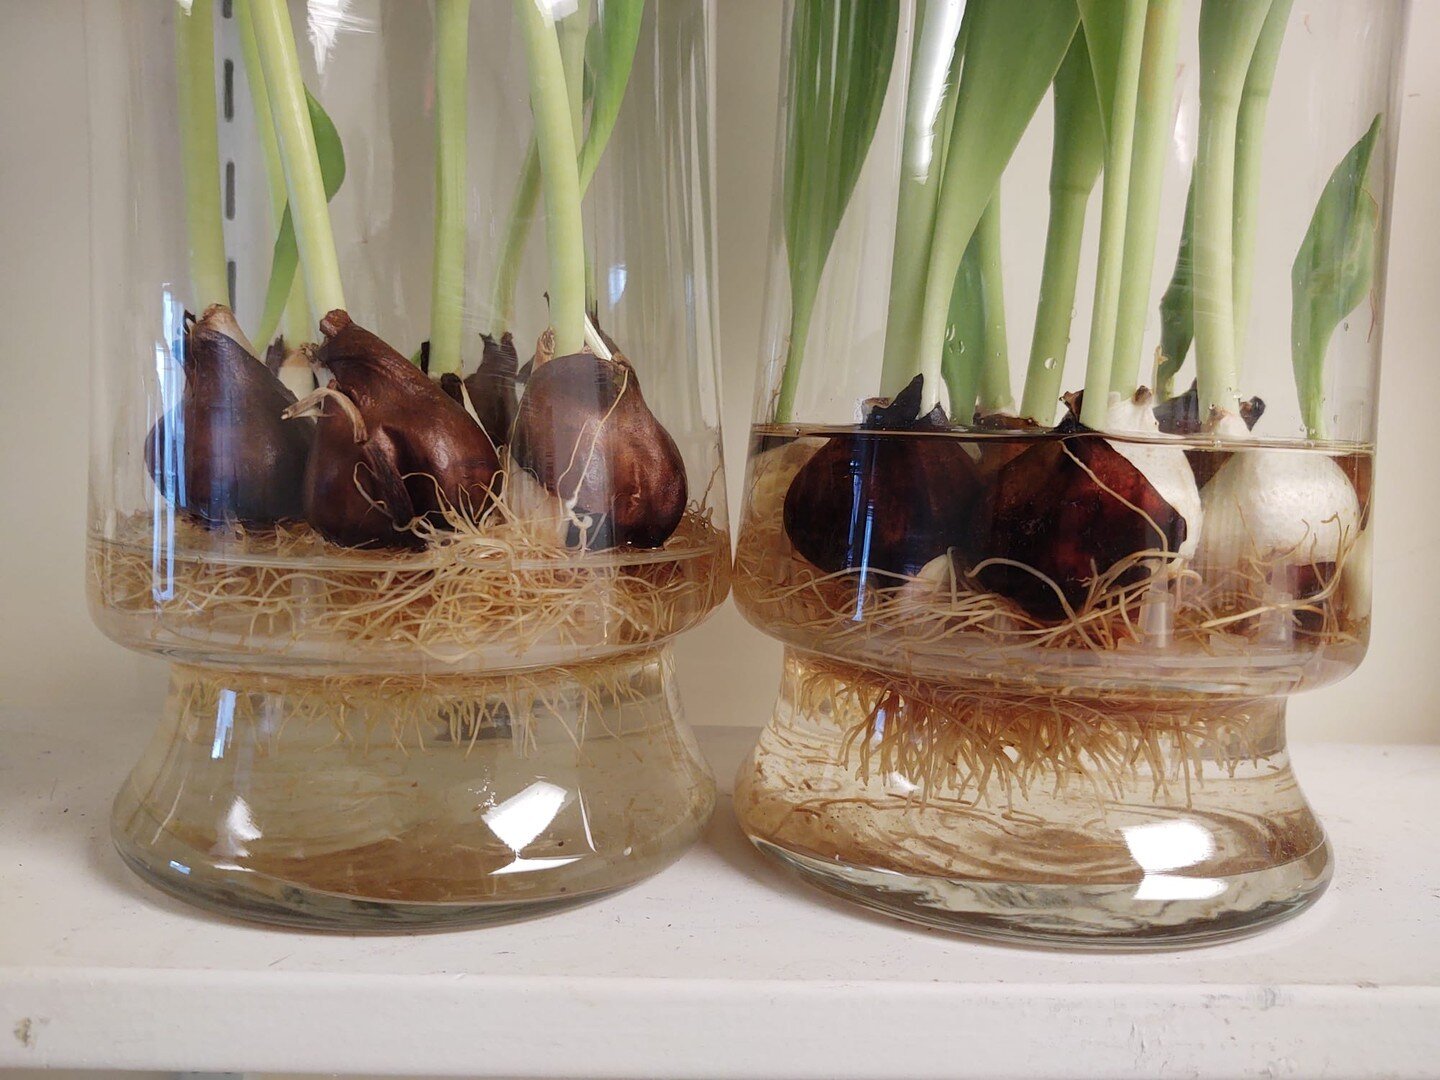 Top Tip Tuesday: When watering your Tulips make sure to not over water as seen in the example on the right. It's ideal to have the roots wet but not submerge the bulb, as in the vase on the left. This could suffocate your bulb and lead to molding. ht